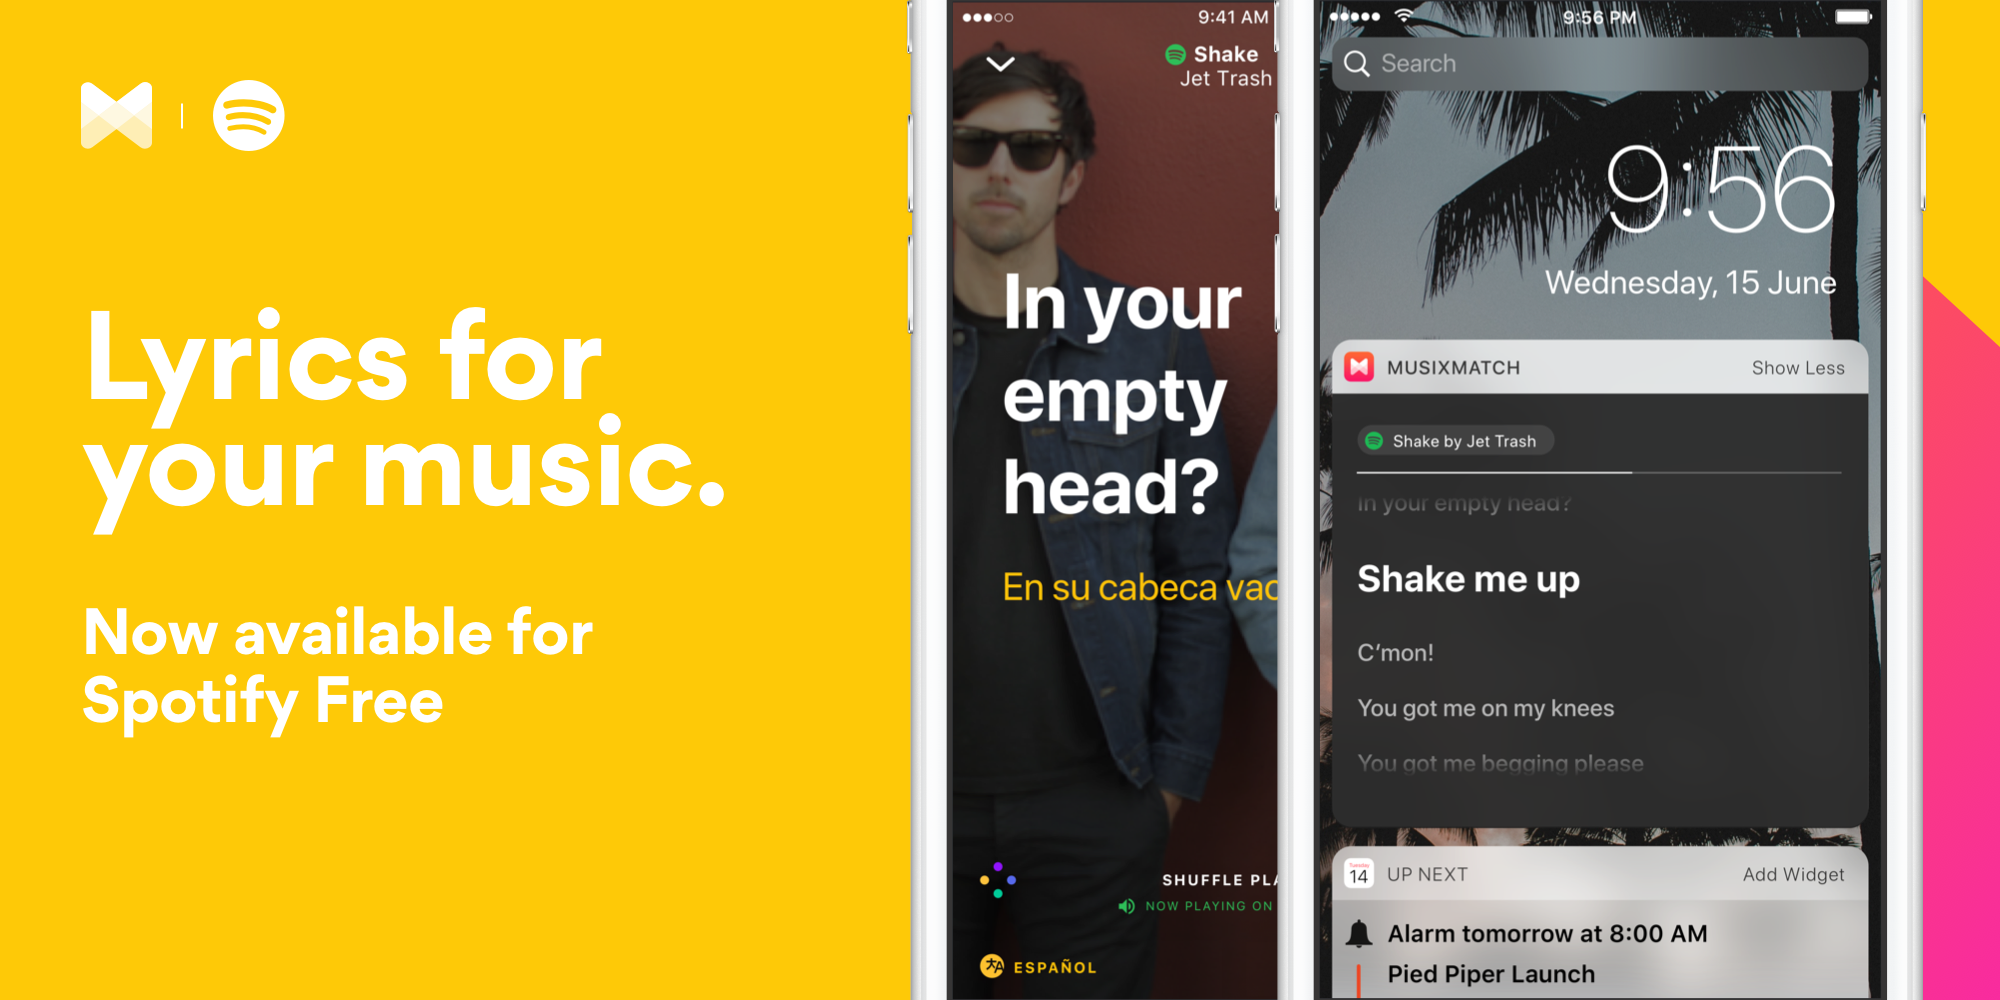 Spotify are bringing lyrics to Free and Premium listeners in Latin America, South Asia, and Southeast Asia